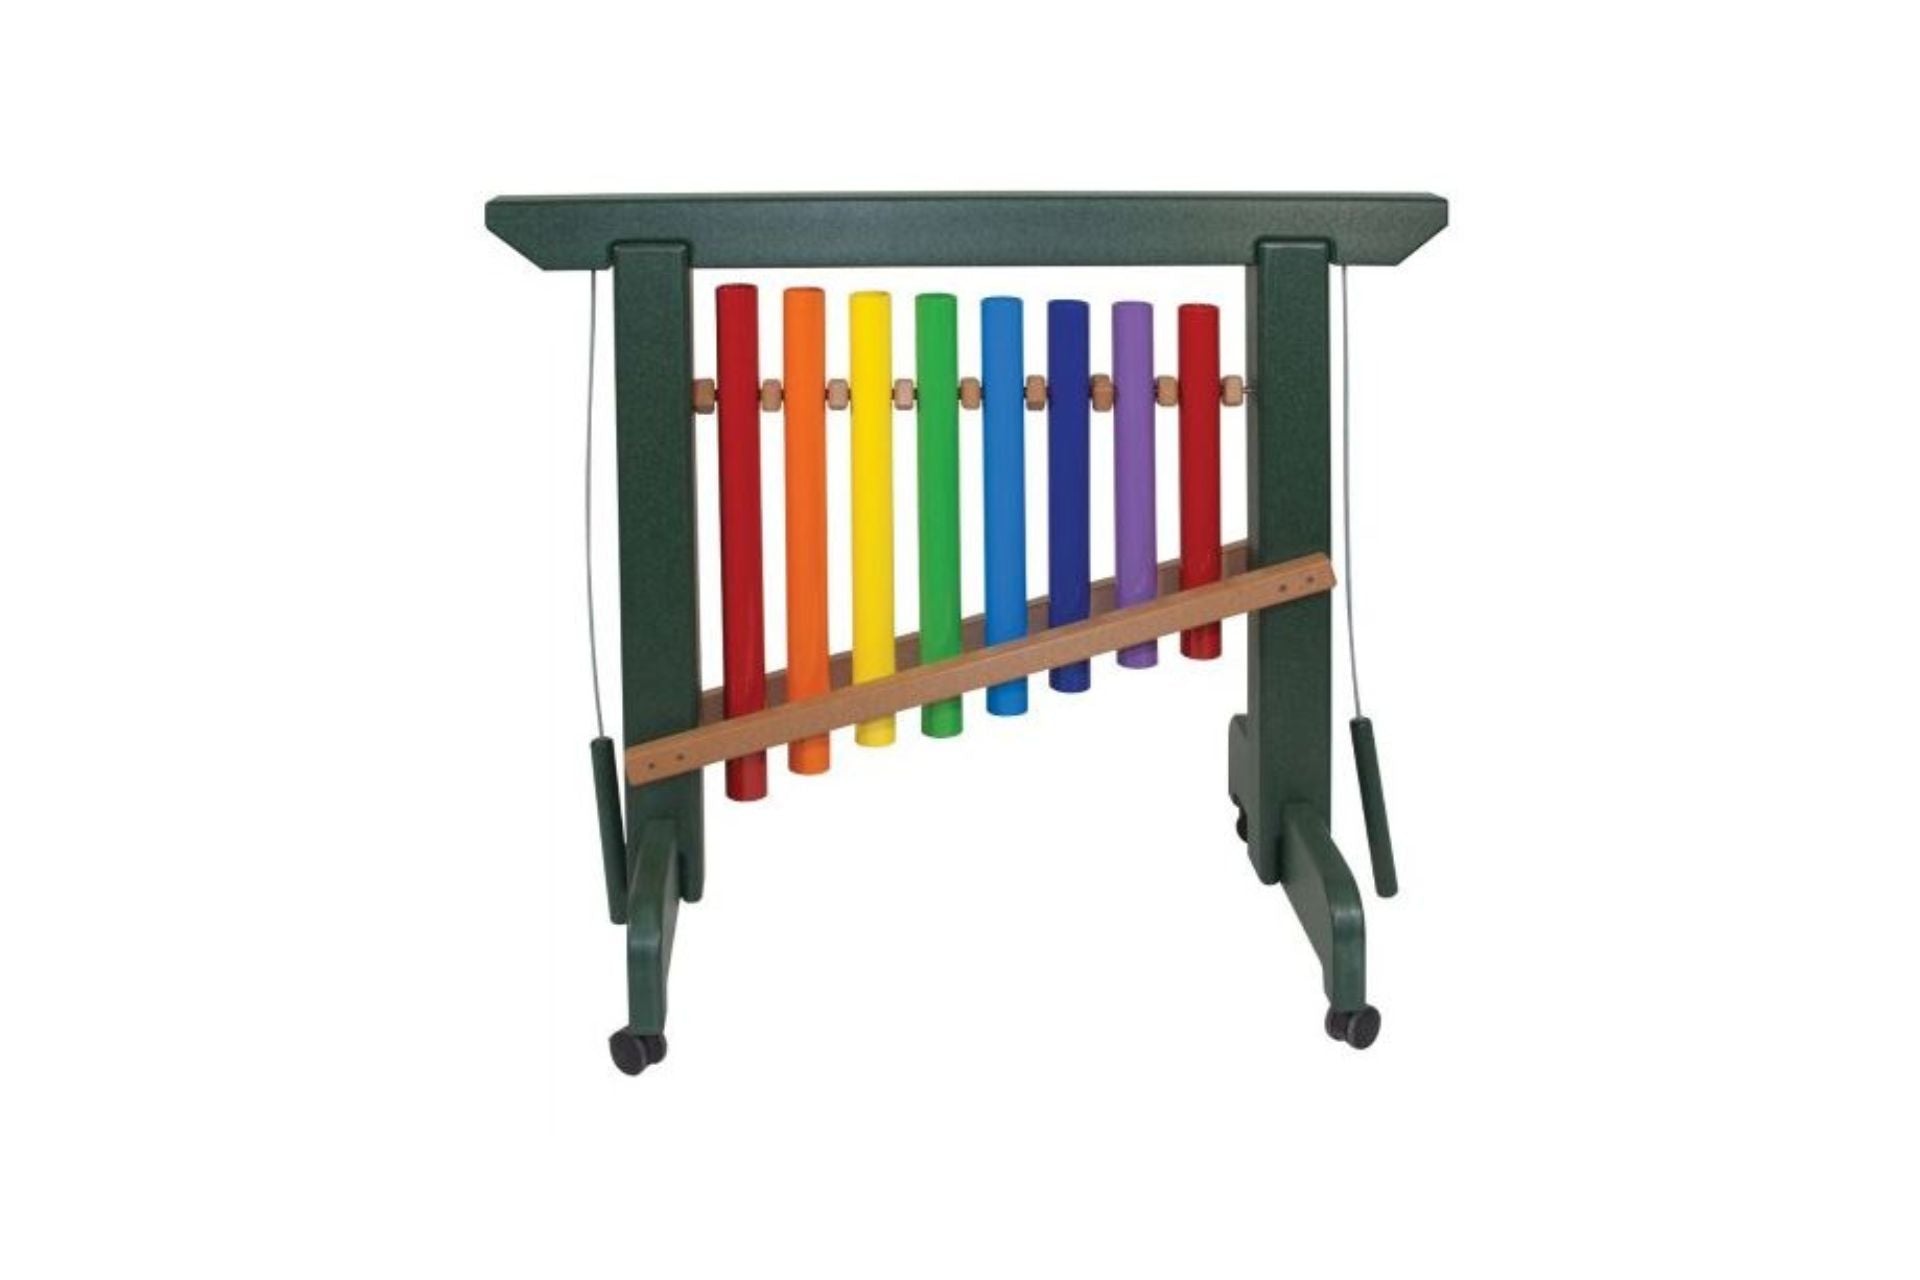 8 Note Rainbow Chime Unit